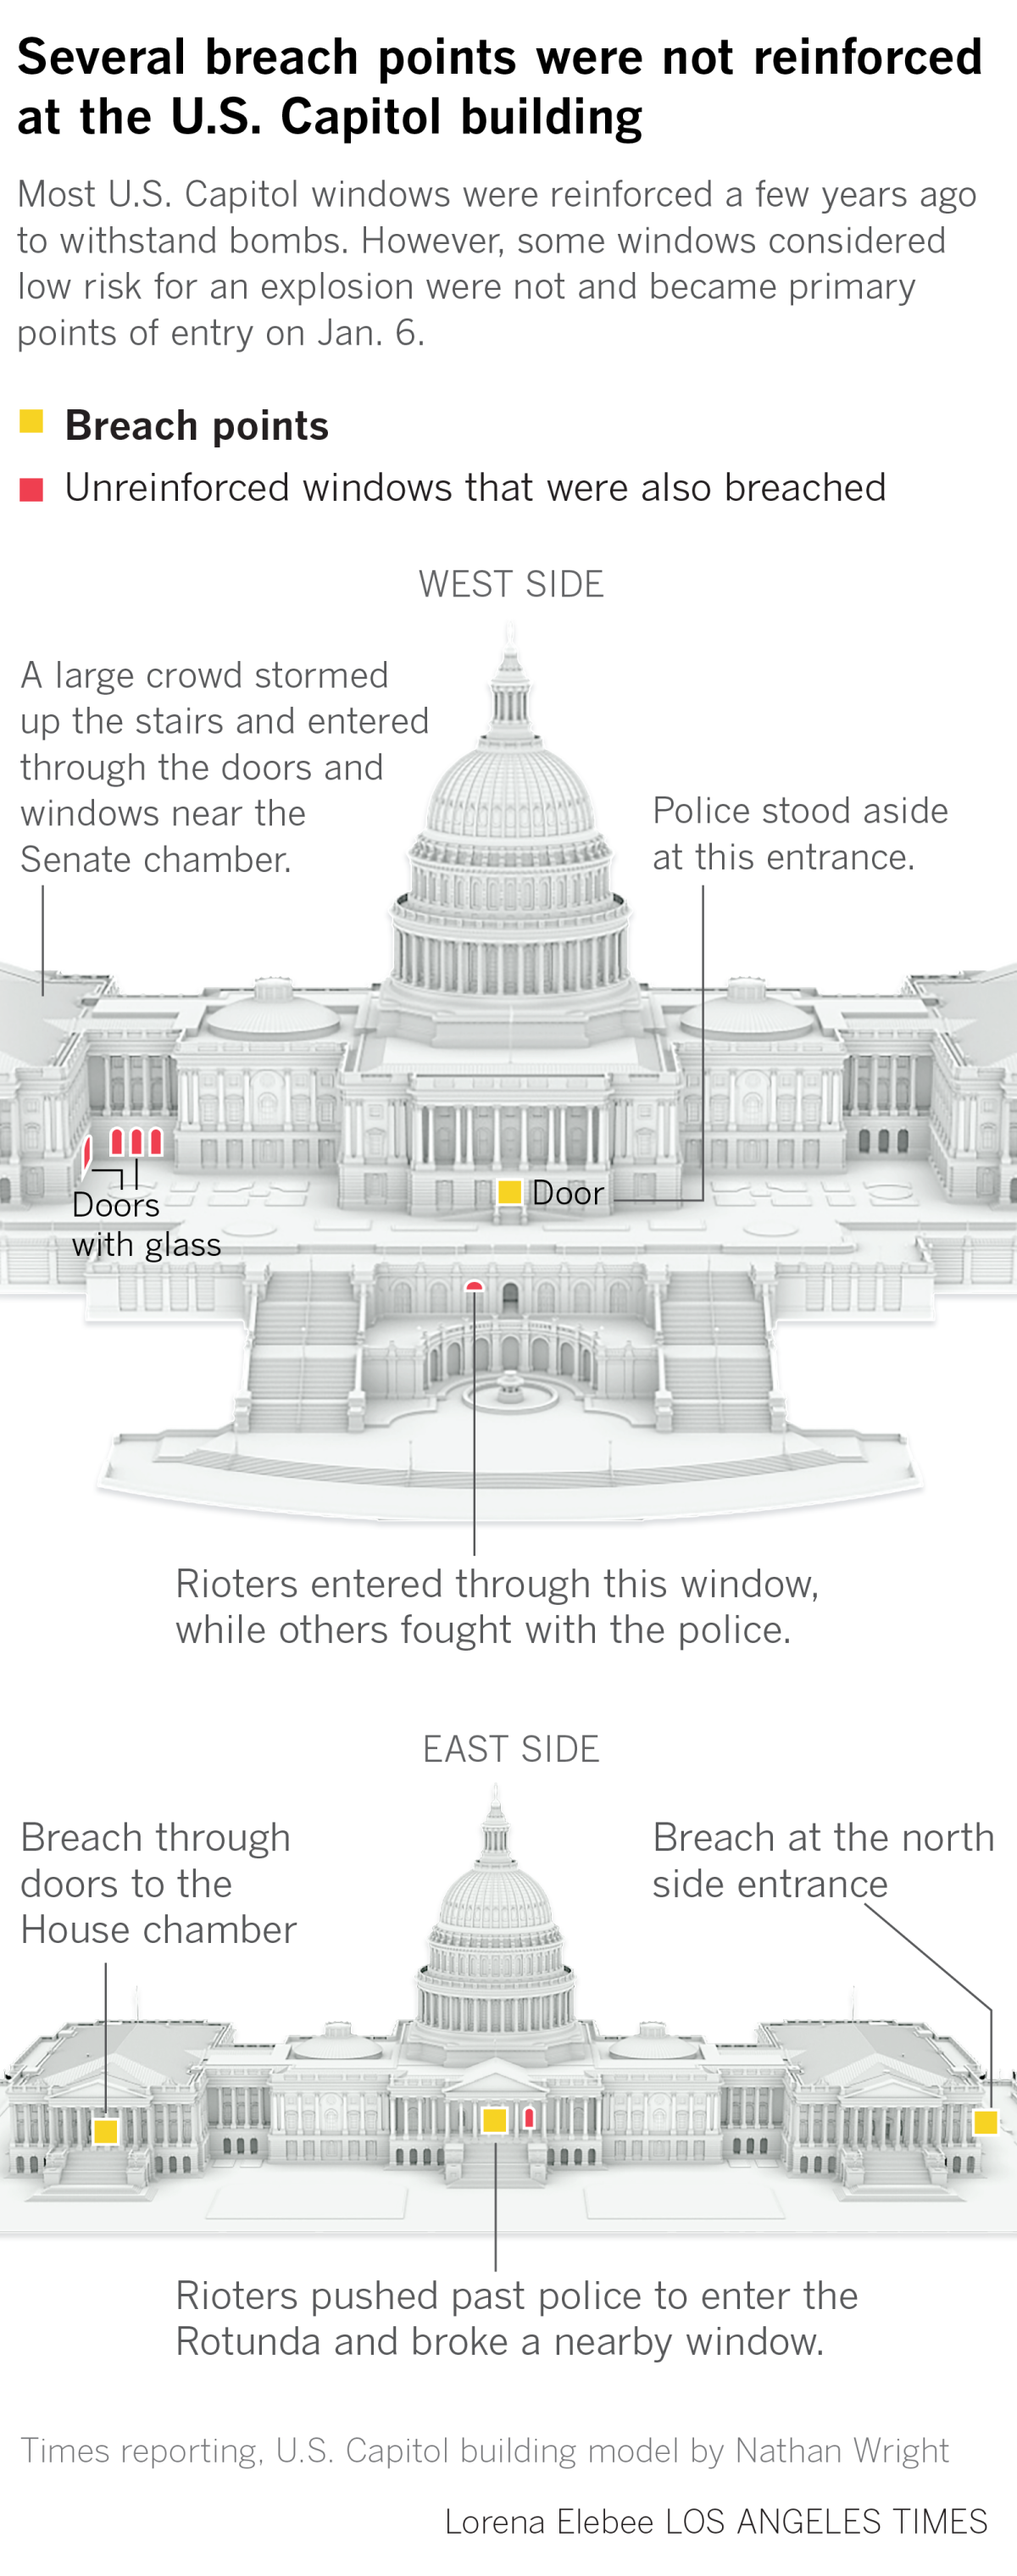 Diagram of the U.S. Capitol building breaches on Jan. 6.